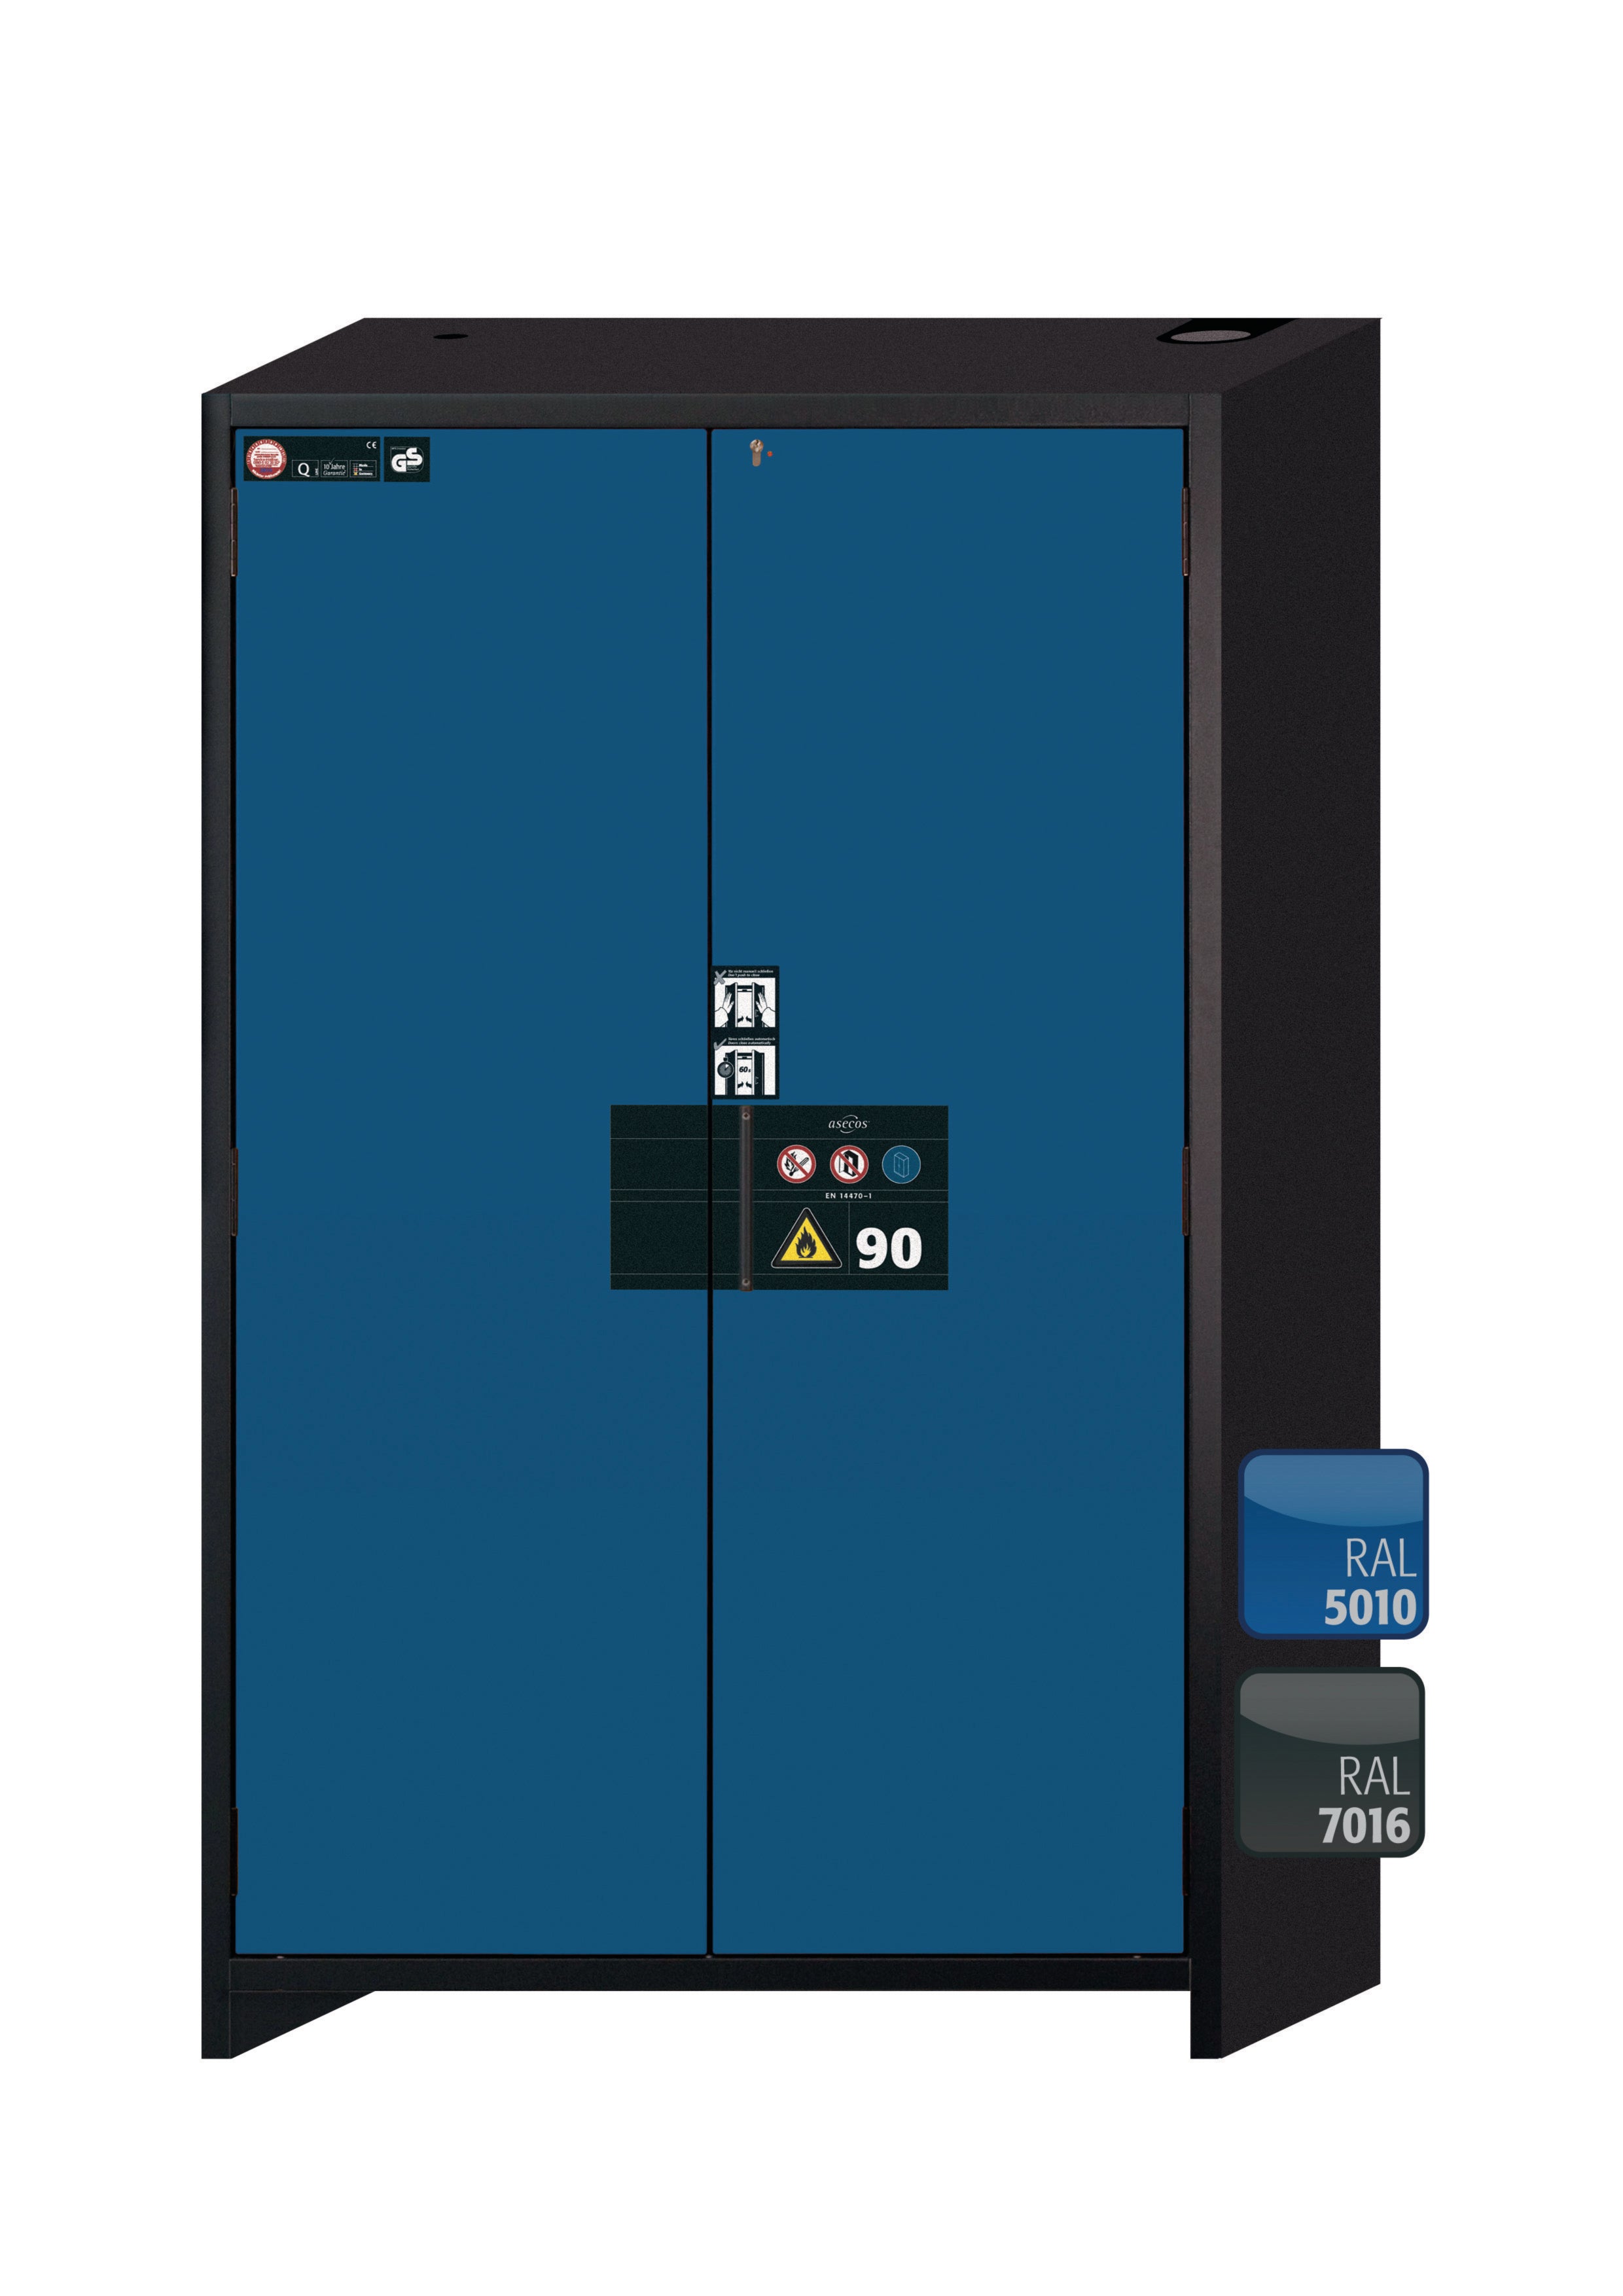 Type 90 safety storage cabinet Q-PEGASUS-90 model Q90.195.120.WDAC in gentian blue RAL 5010 with 5x drawer (standard) (sheet steel),